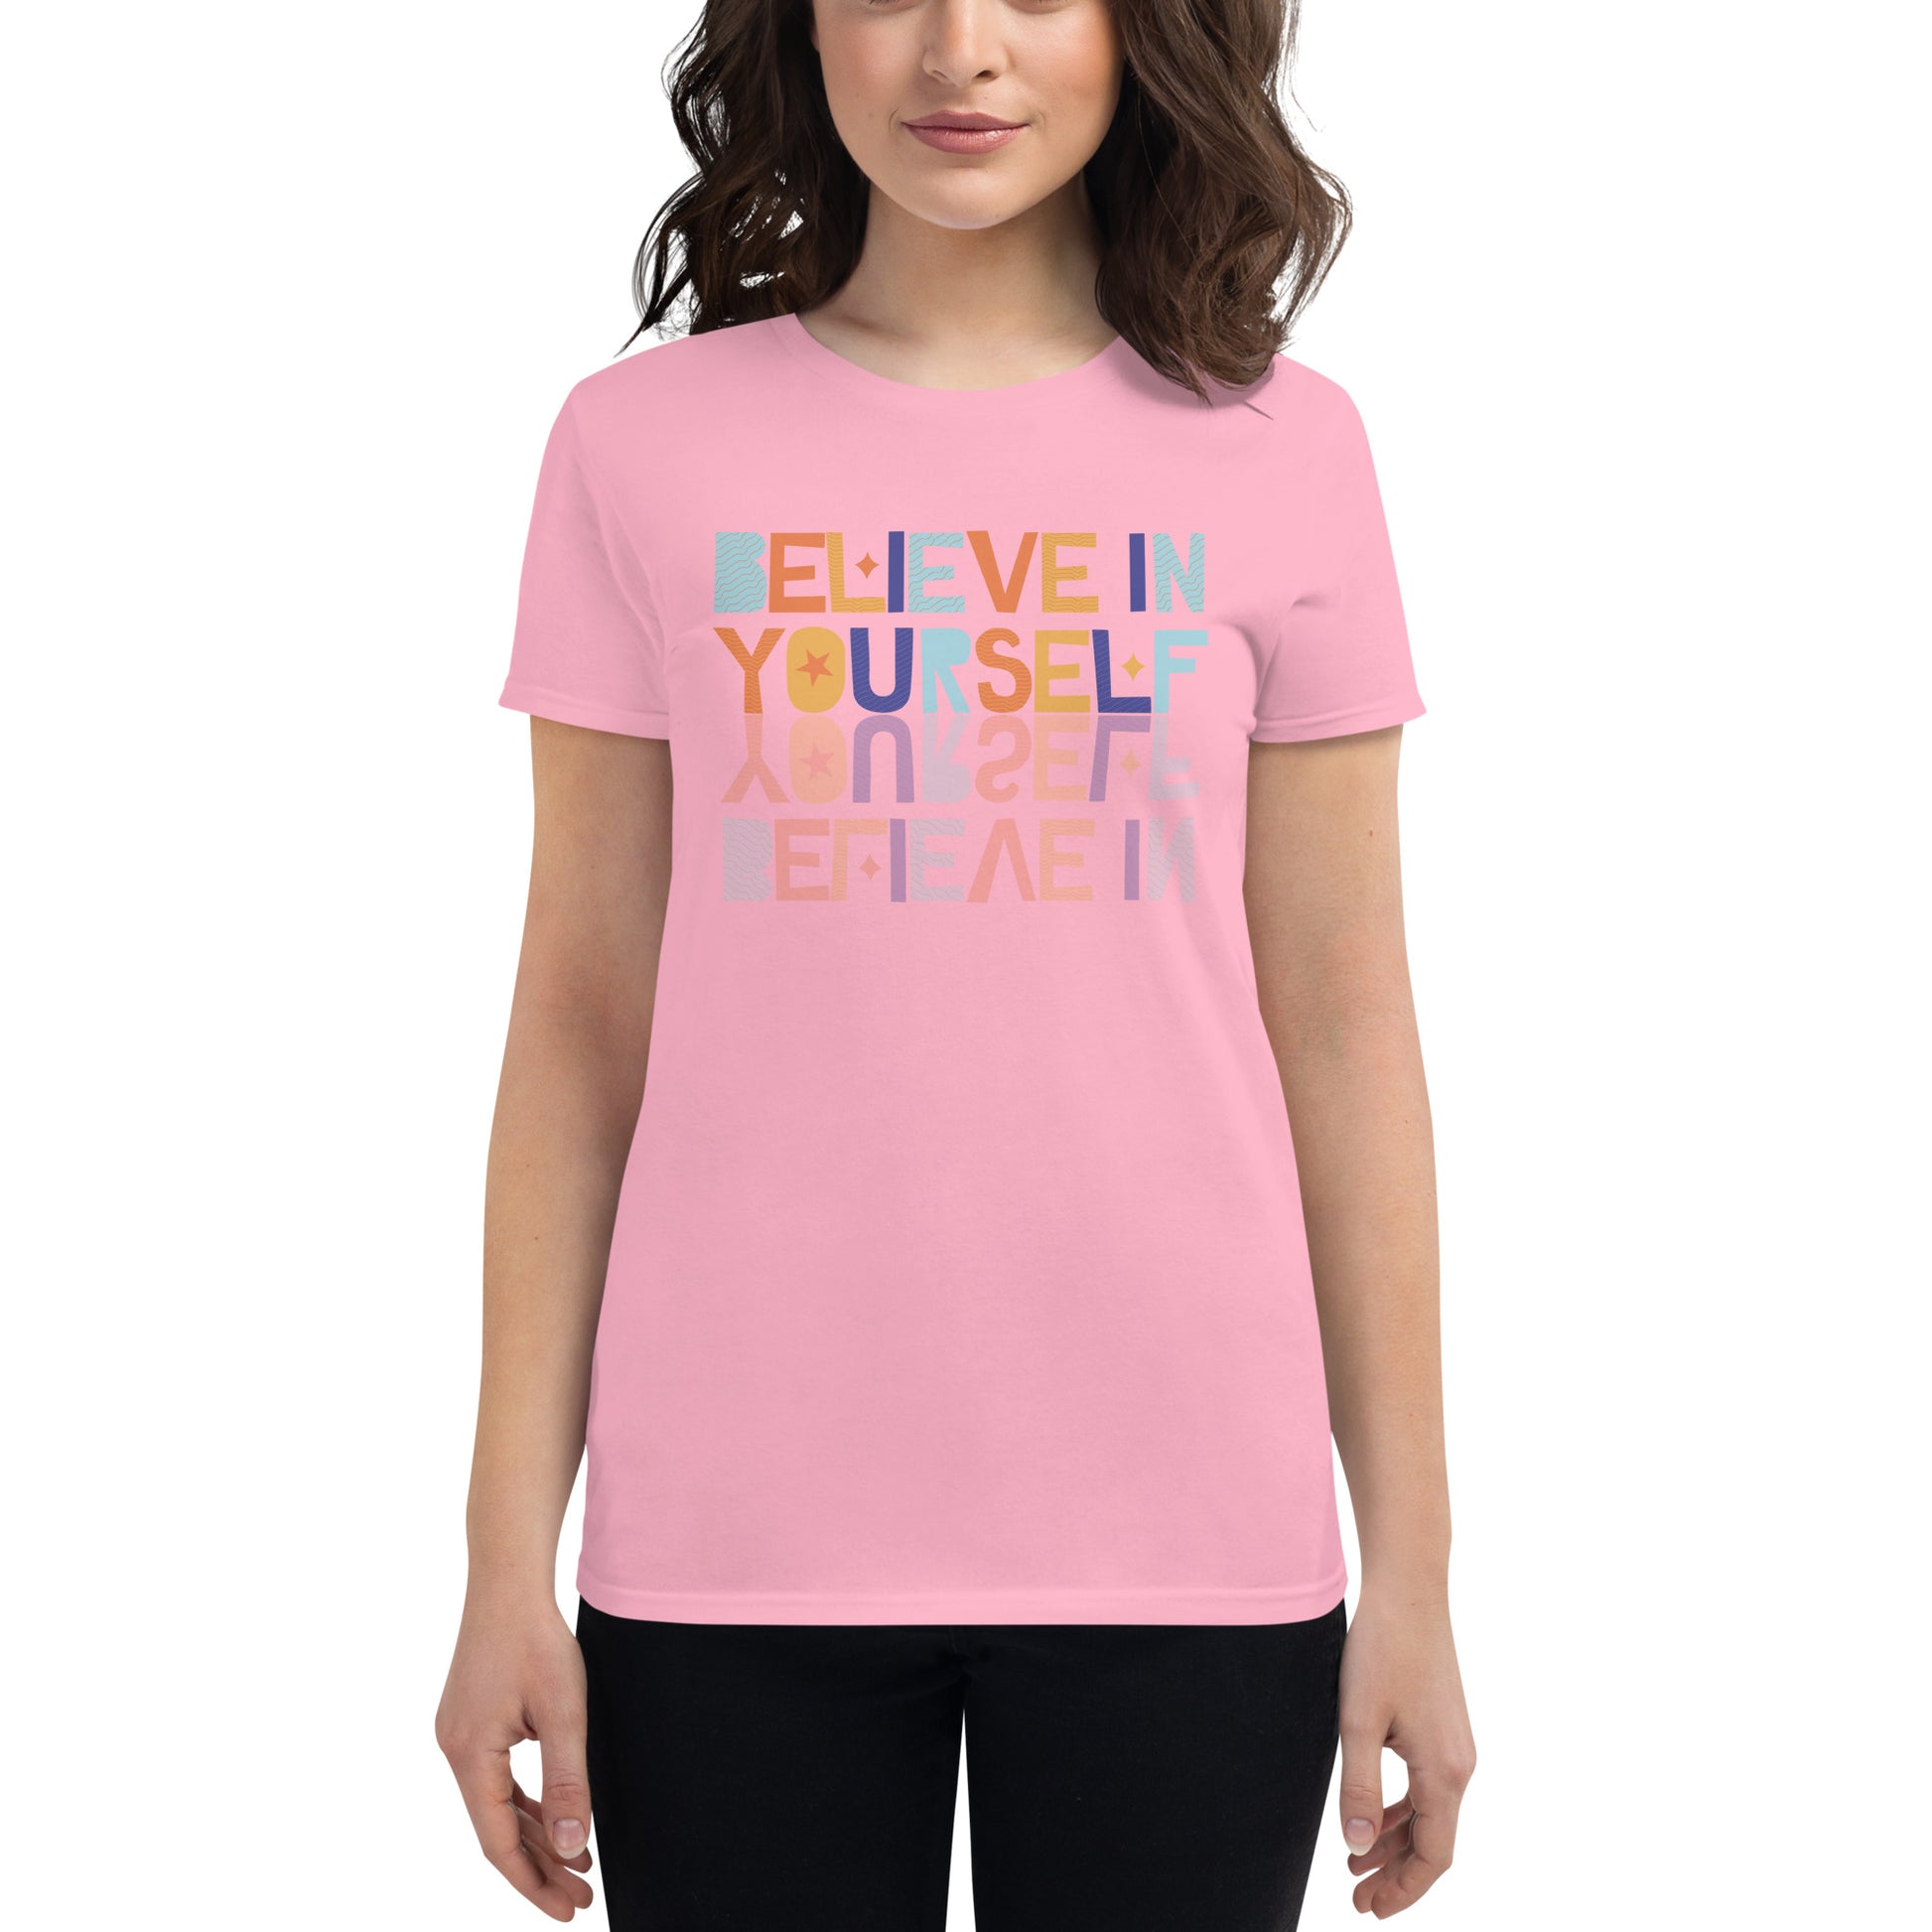 "Believe In Yourself" T-Shirt - Weave Got Gifts - Unique Gifts You Won’t Find Anywhere Else!